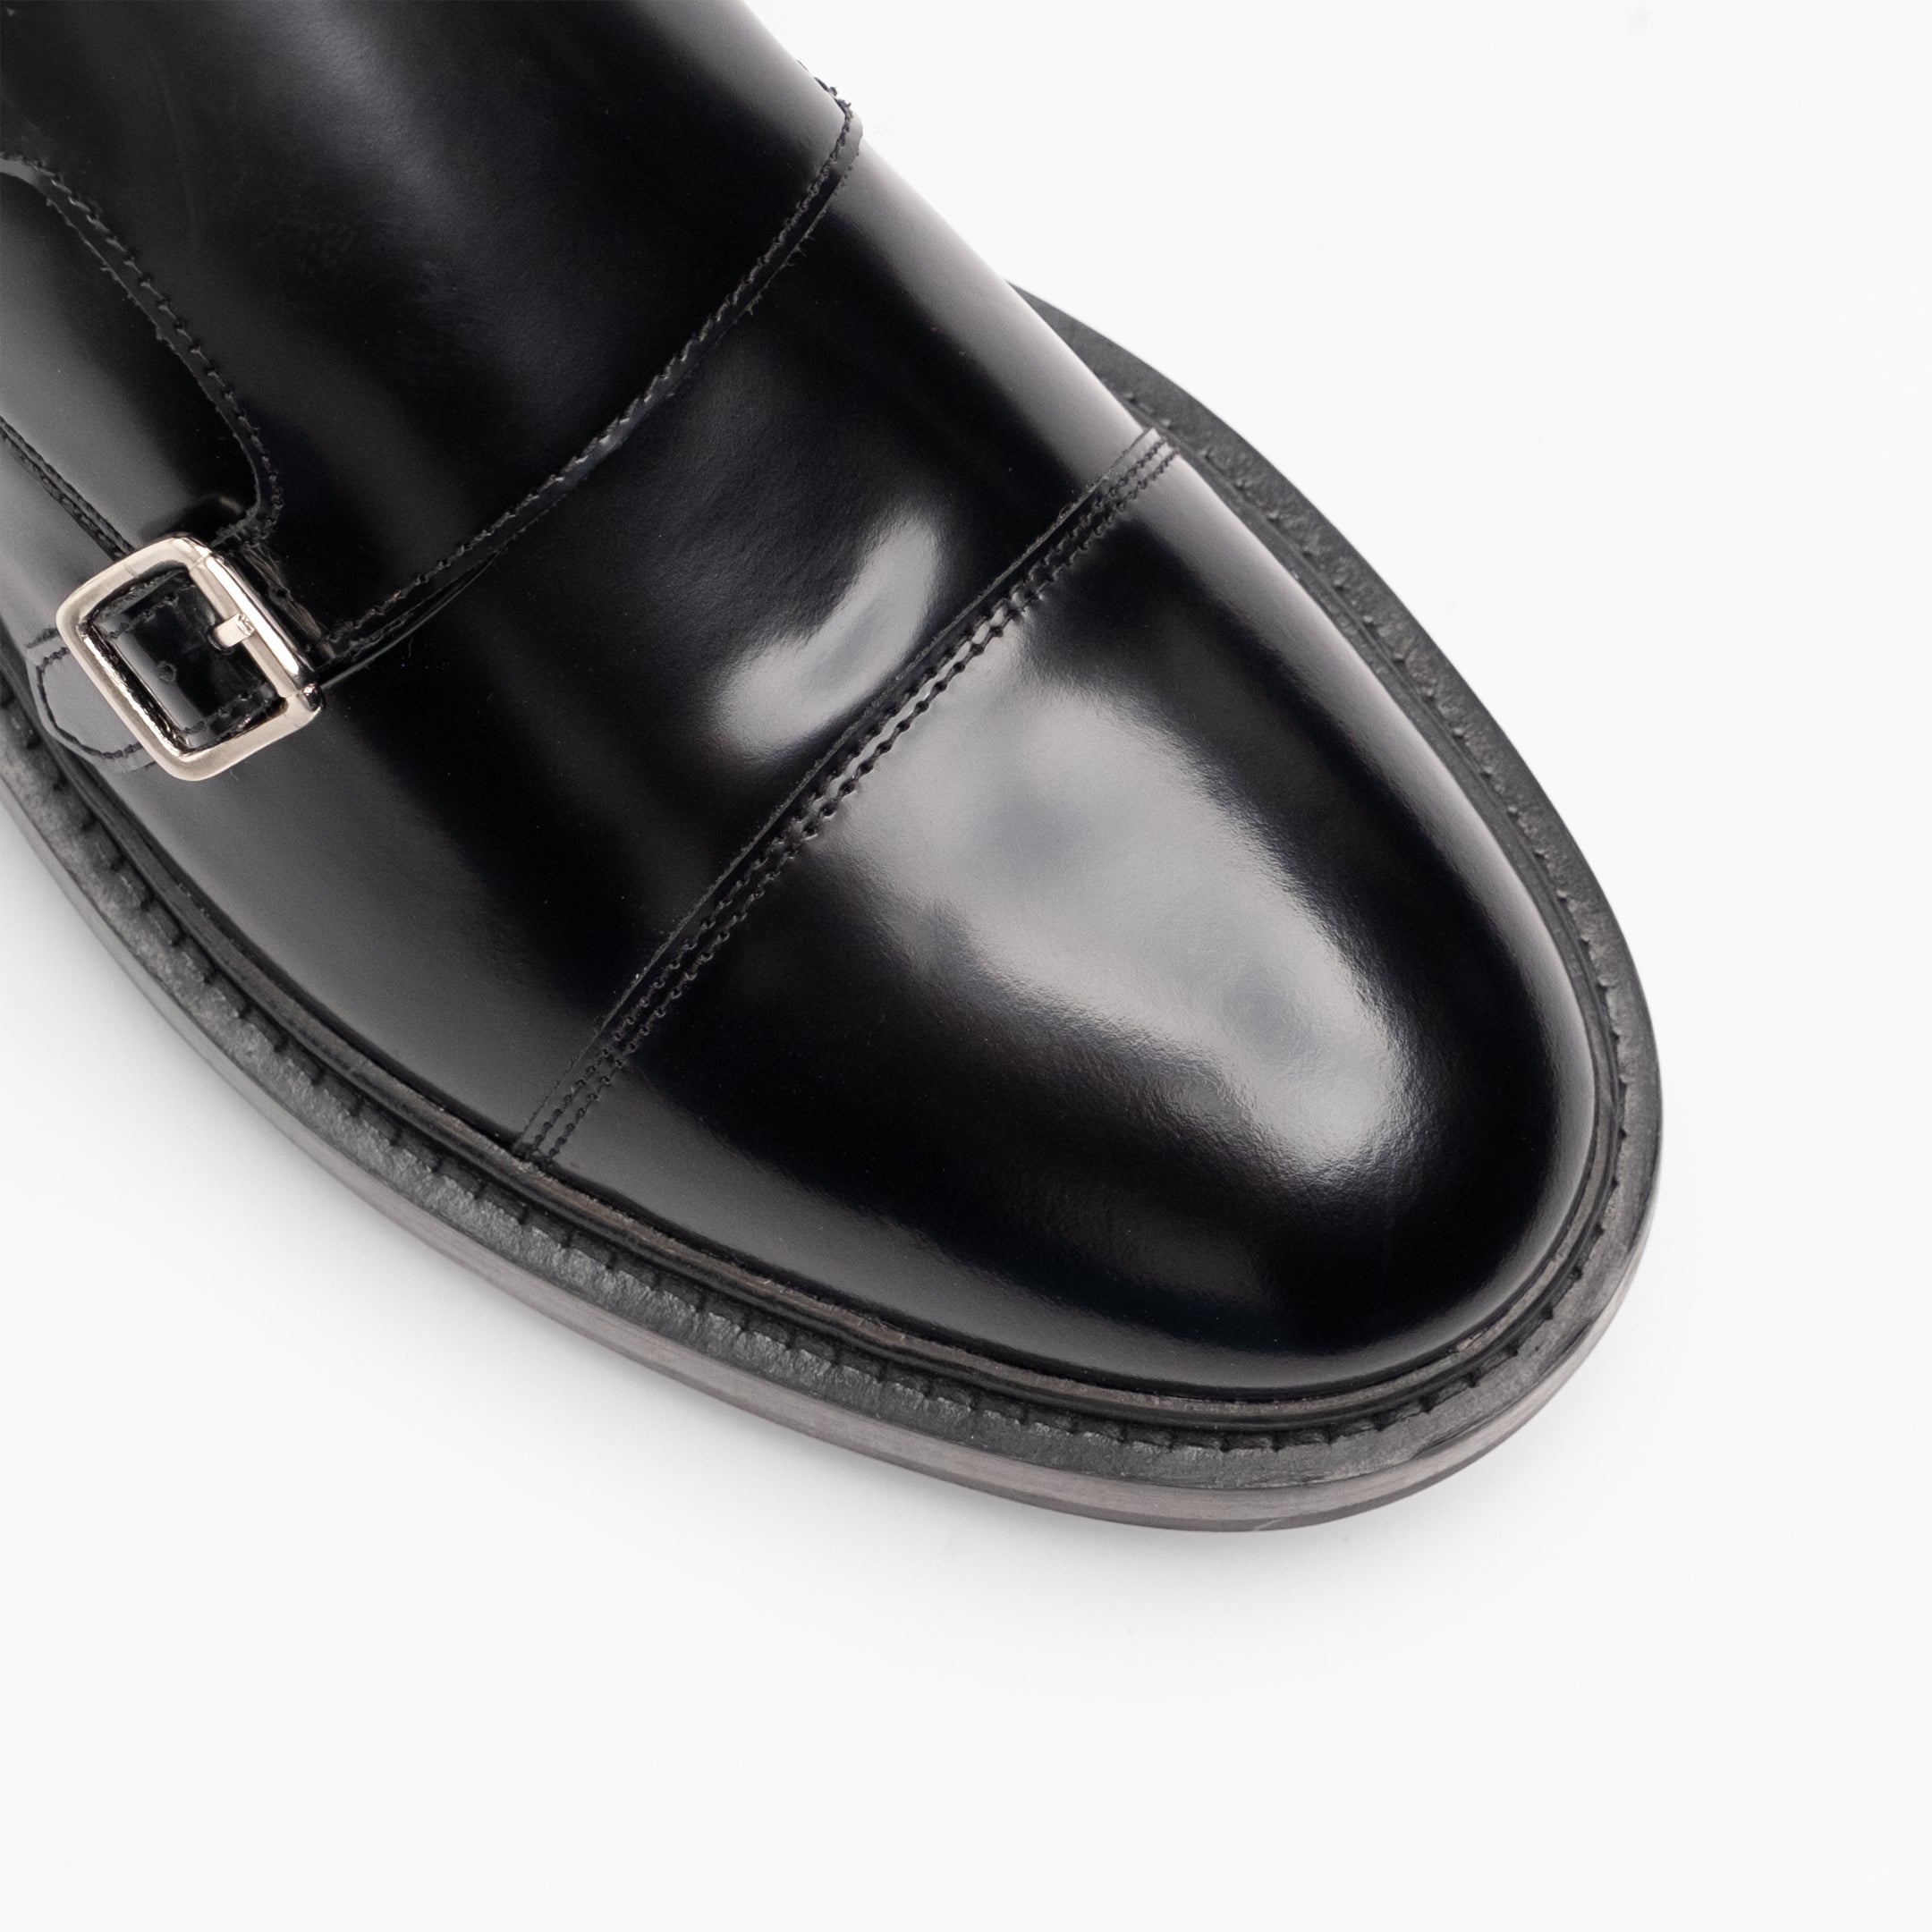 Walk London Mens Justin Monk Shoe in Smooth Black Leather